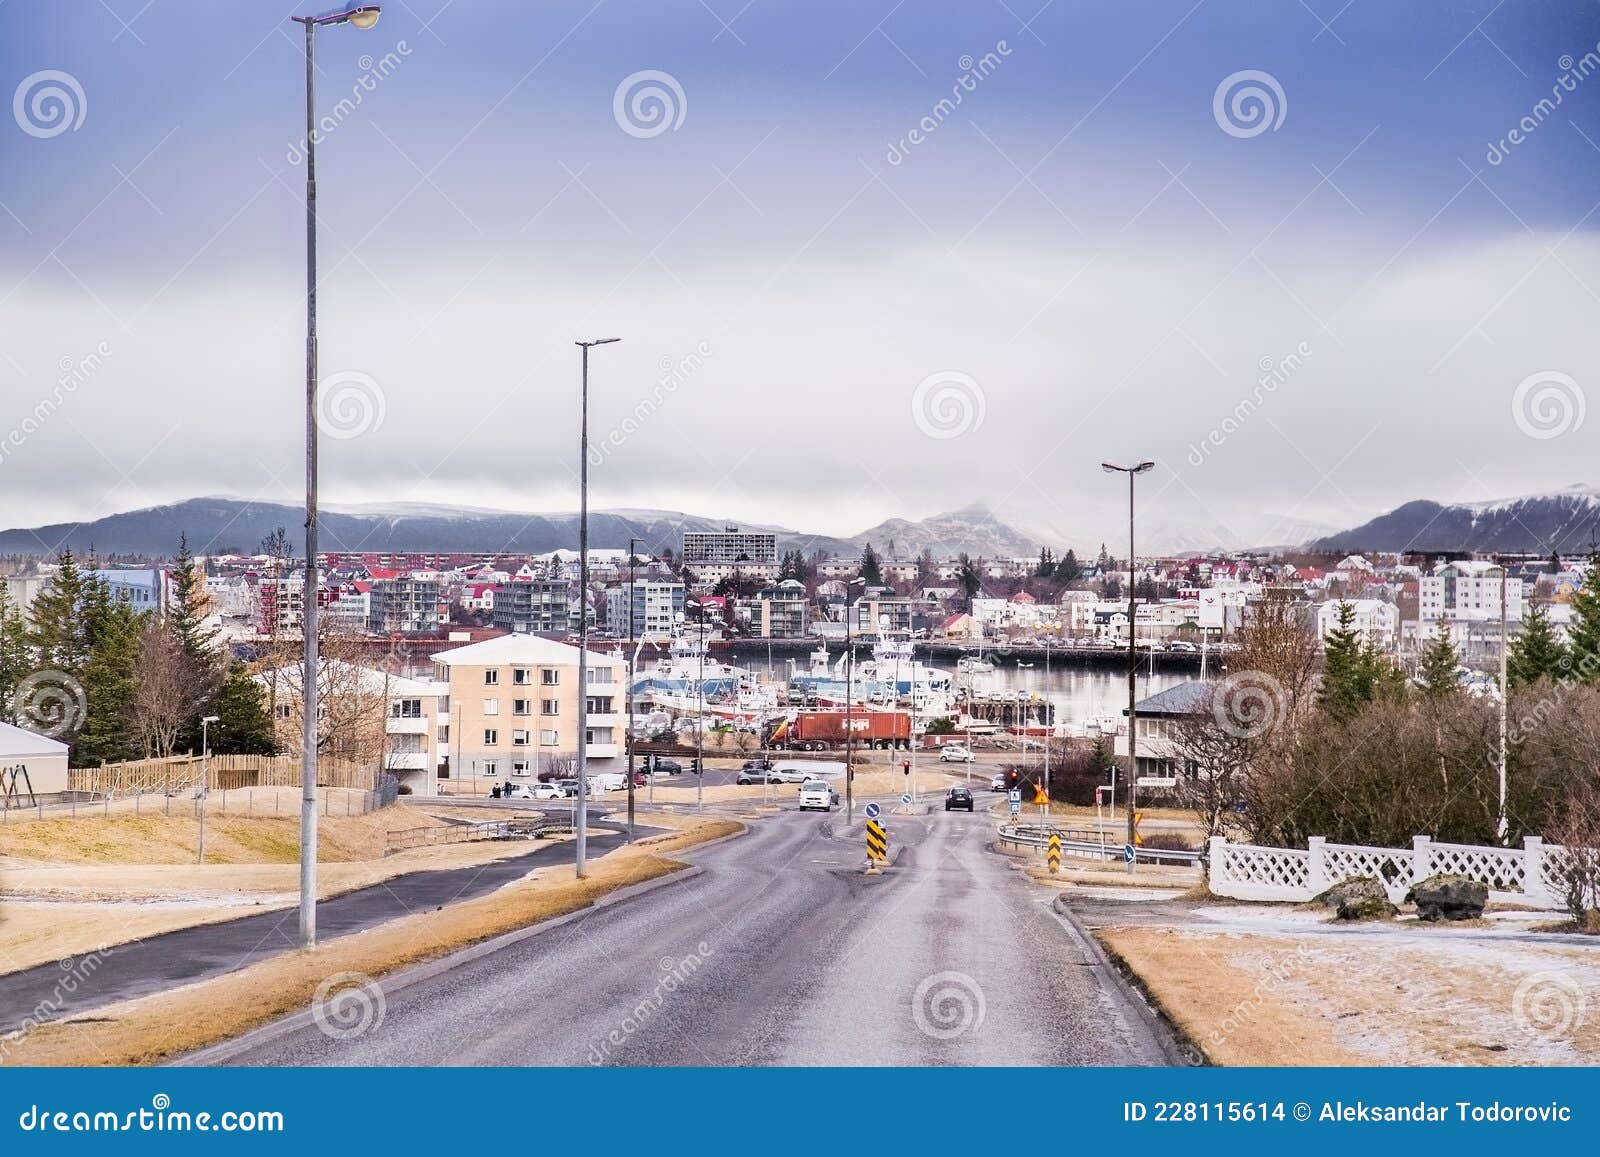 Scenery View on Reykjavik the Capital City of Iceland Editorial Stock ...